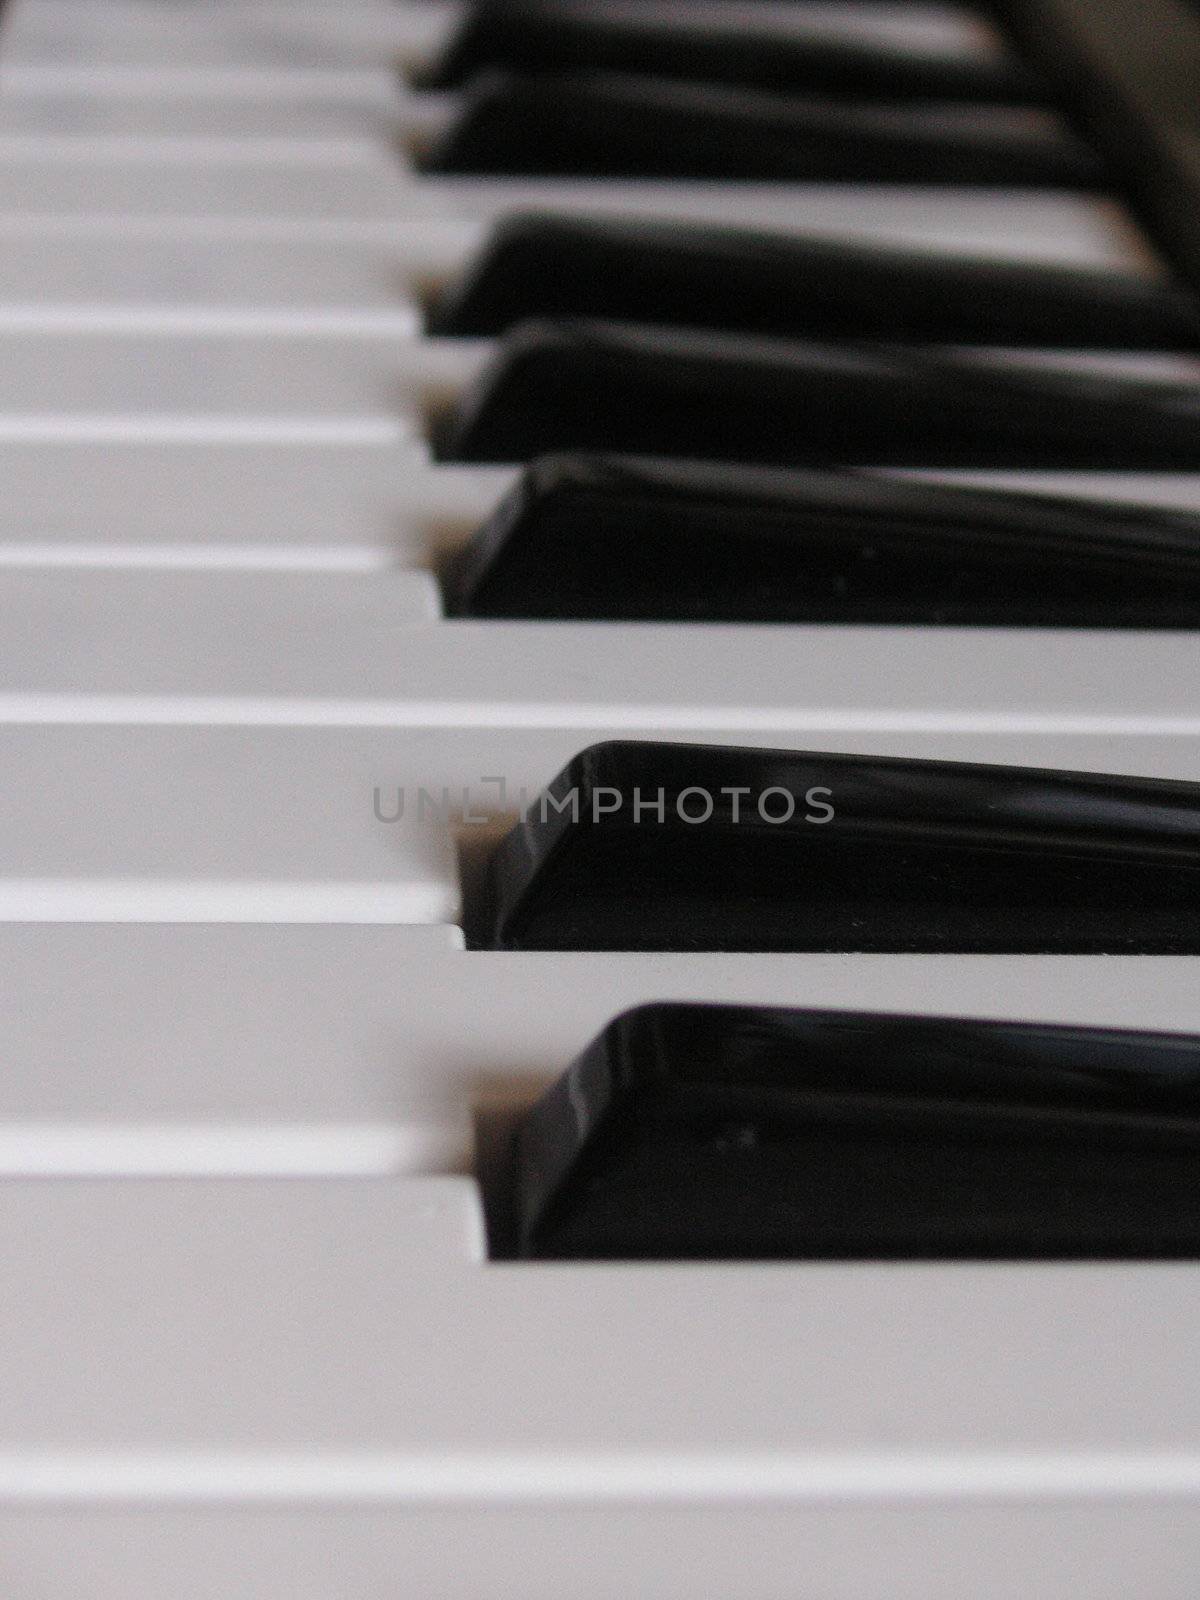 black and white keys of a keyboard by leafy